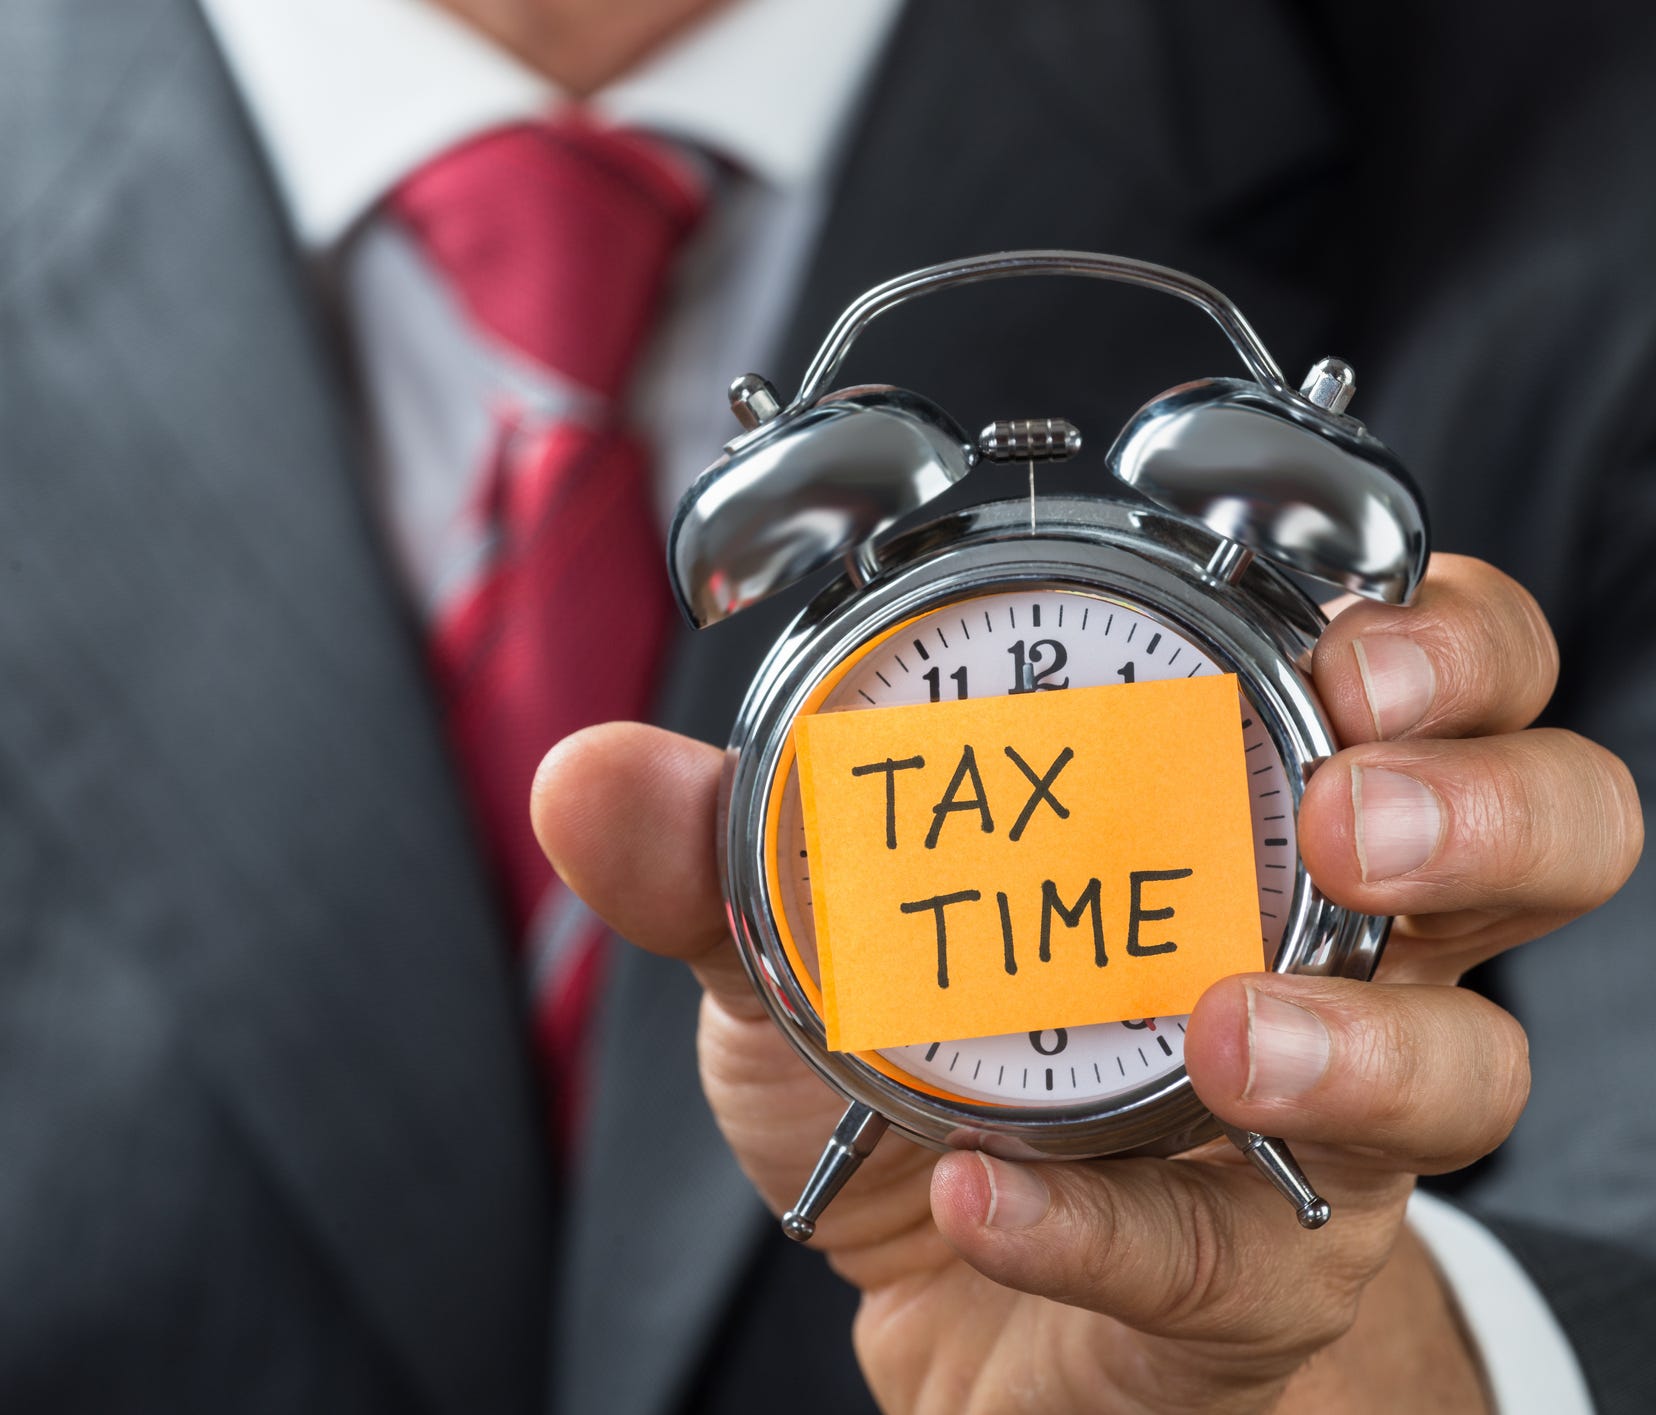 To help avoid making a mess, we put together a list of tax filing things to keep in mind as the deadline approaches.